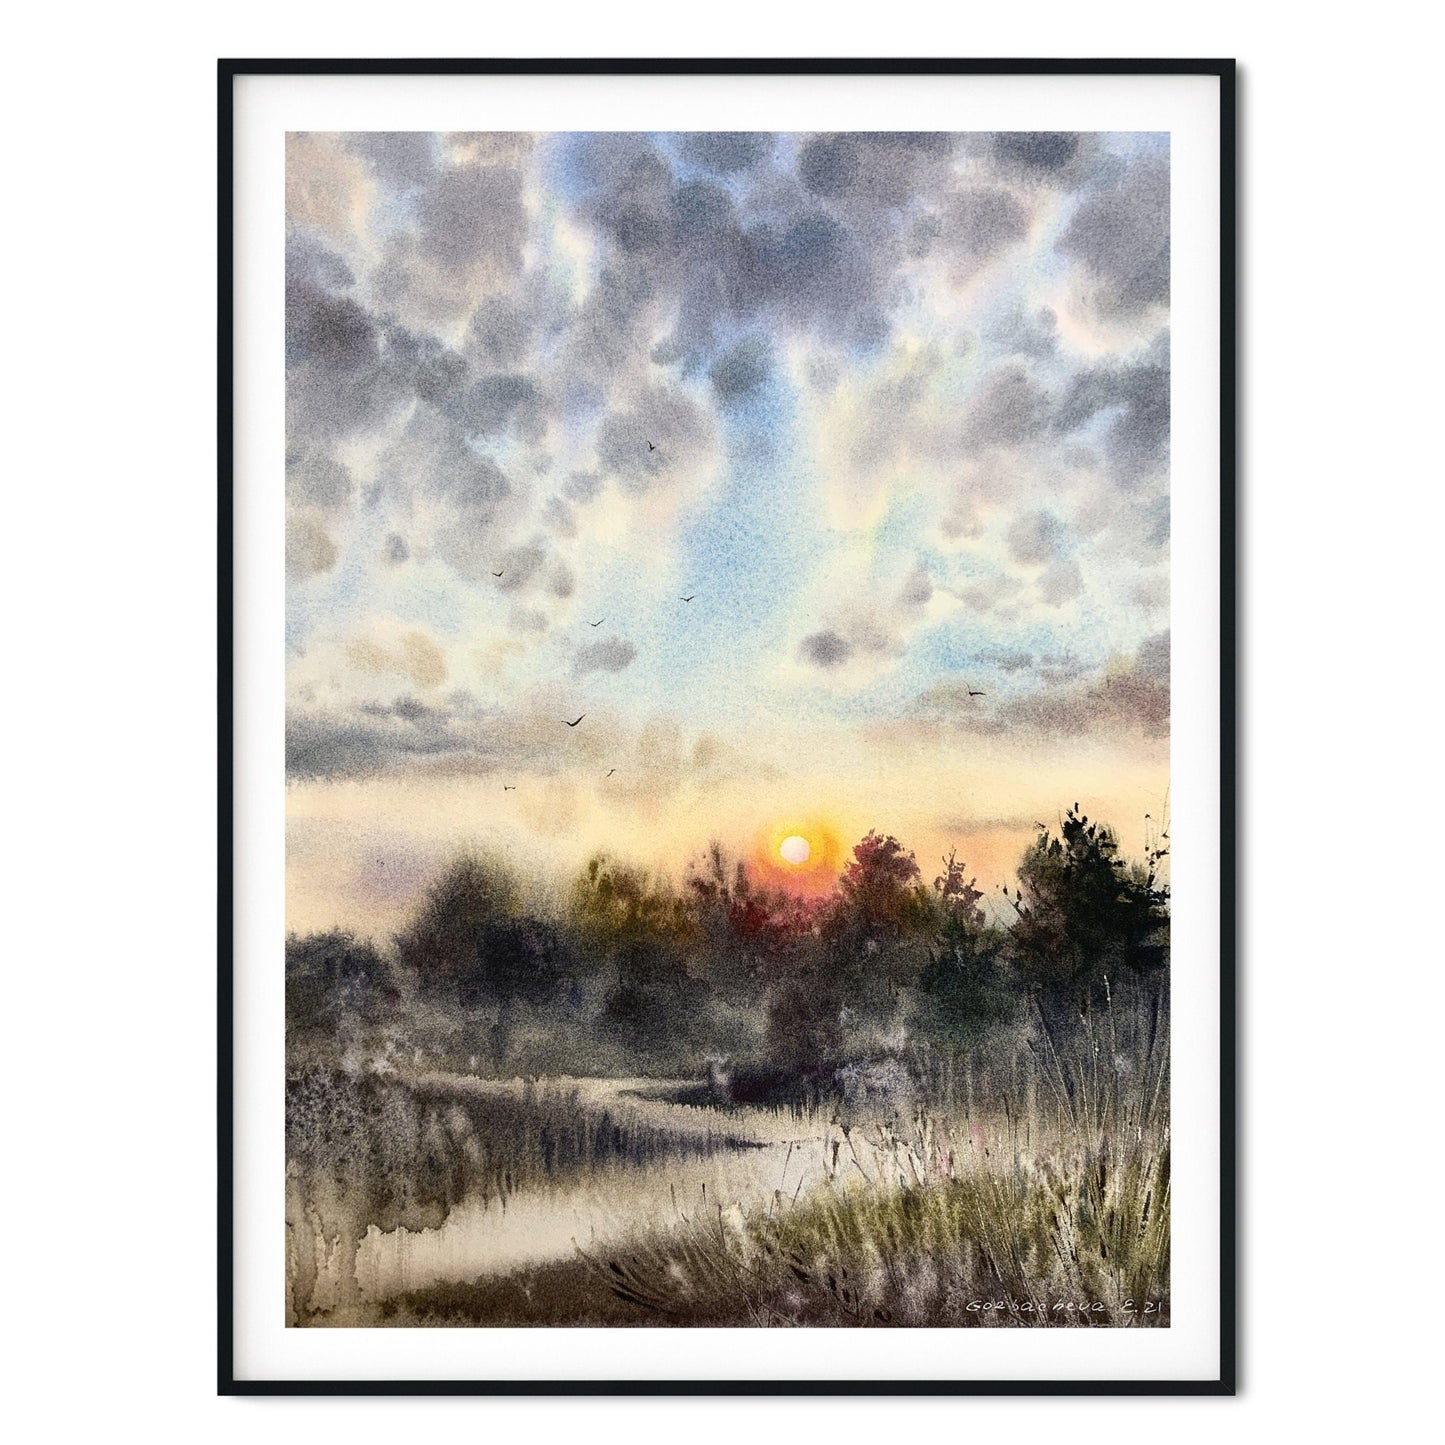 Foggy Field Scenery Painting, Original Watercolor Artwork, Country House Wall Art, Landscape In An Early Morning, Gift